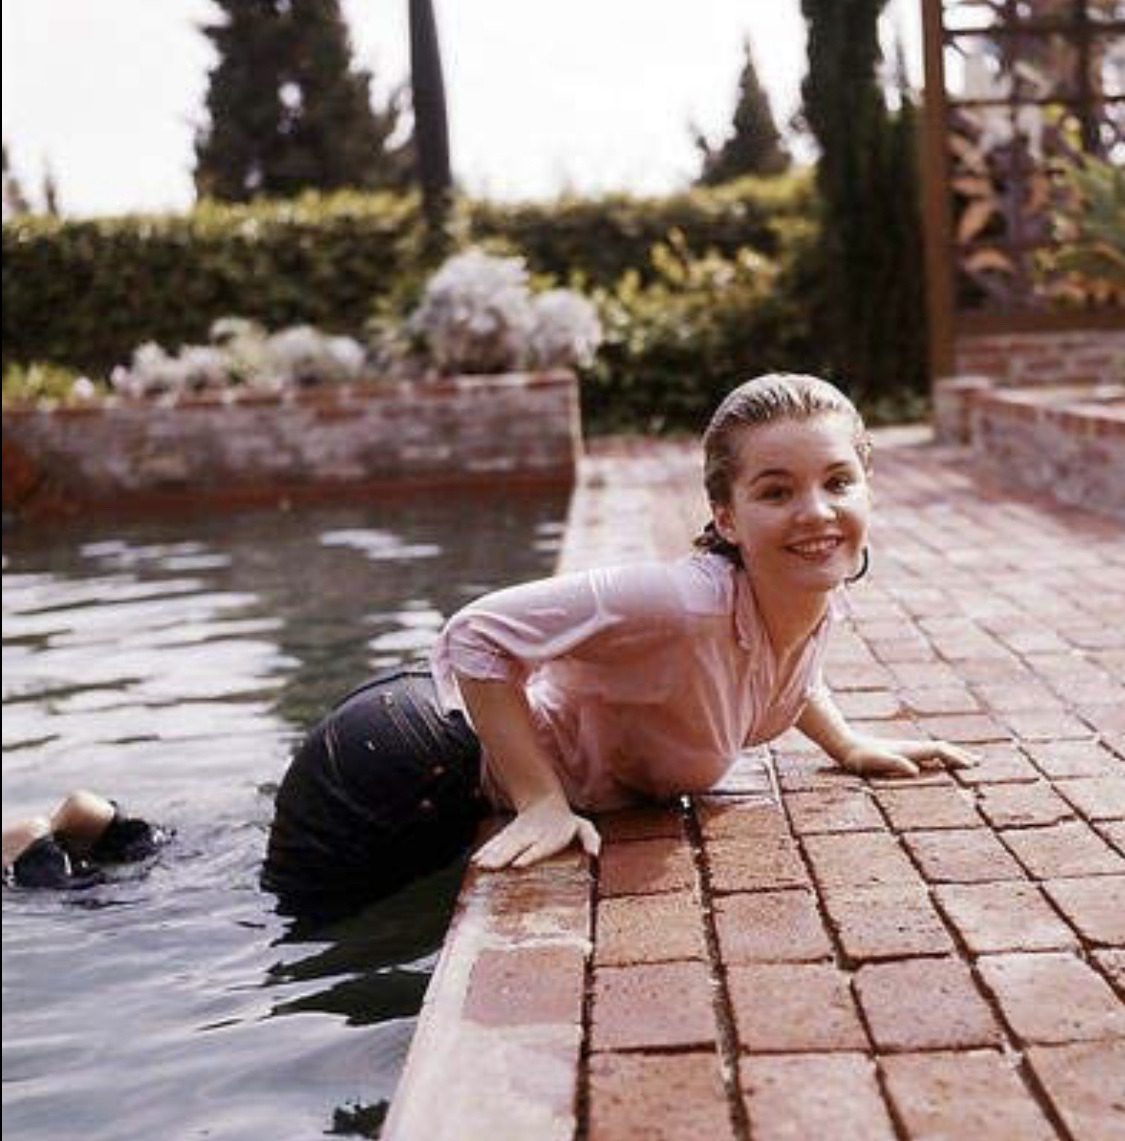 A very wet Tuesday Weld, 1964